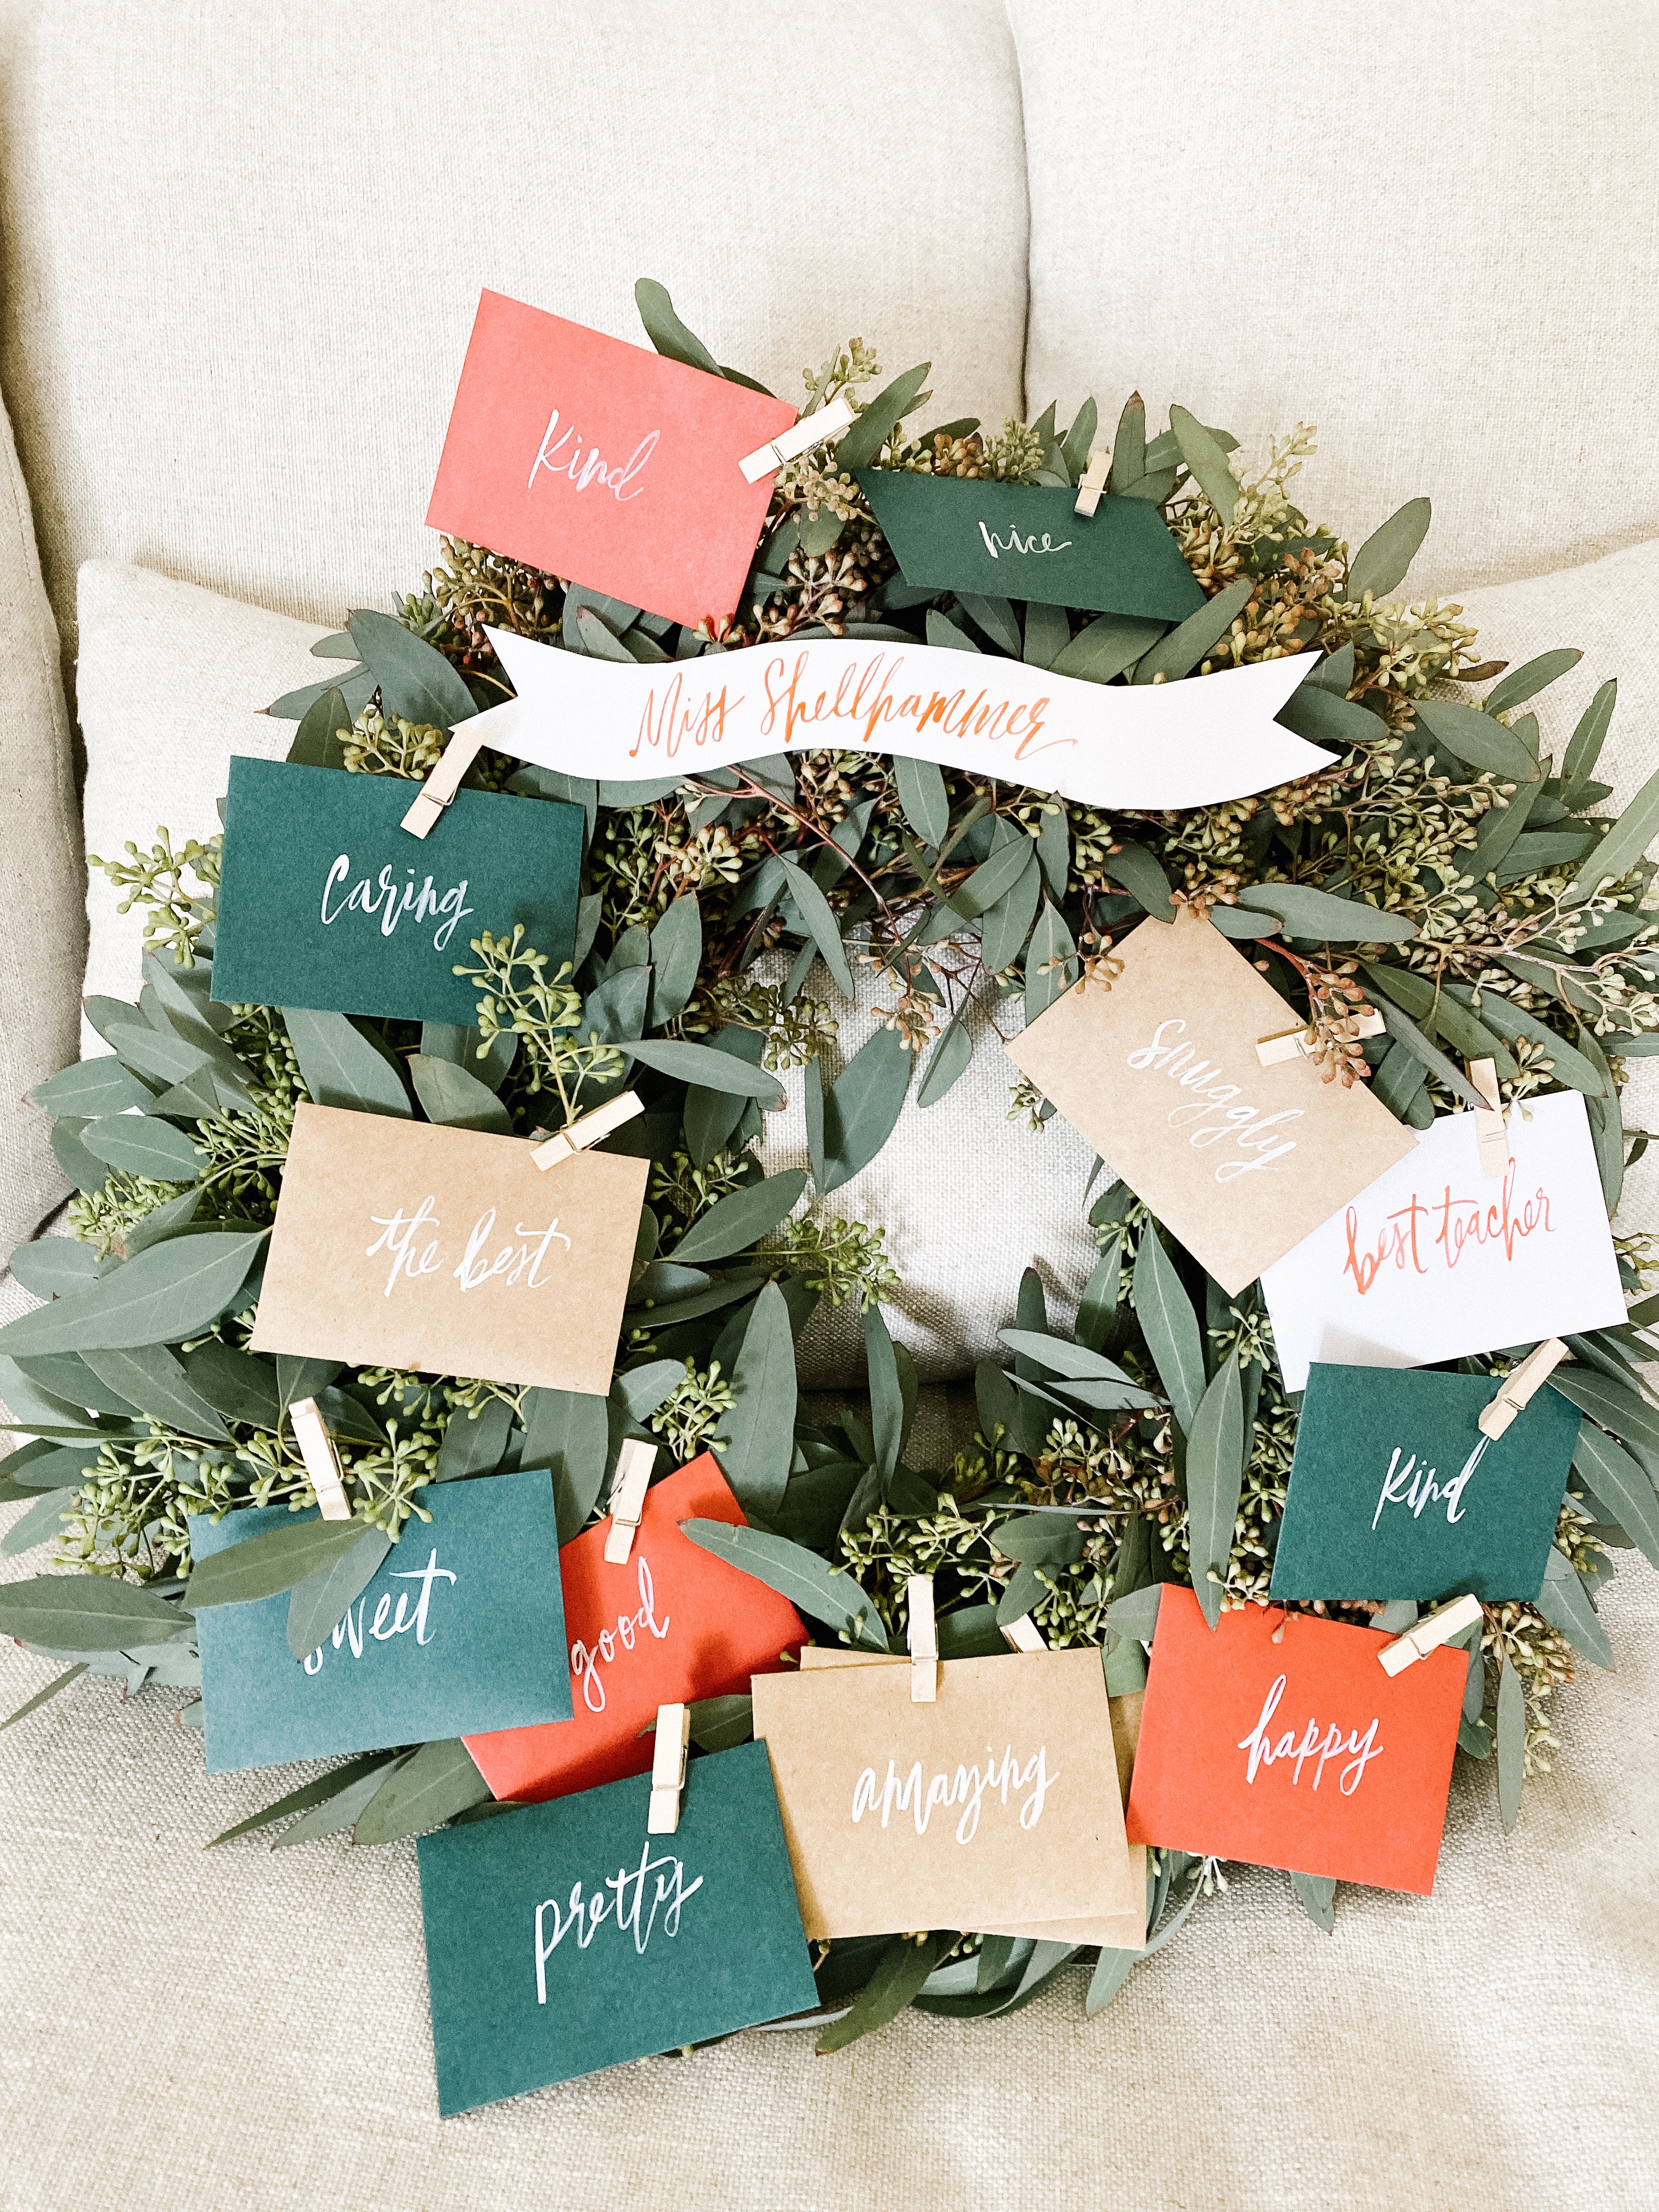 Classroom Gift Card Wreath - inclusive gift option